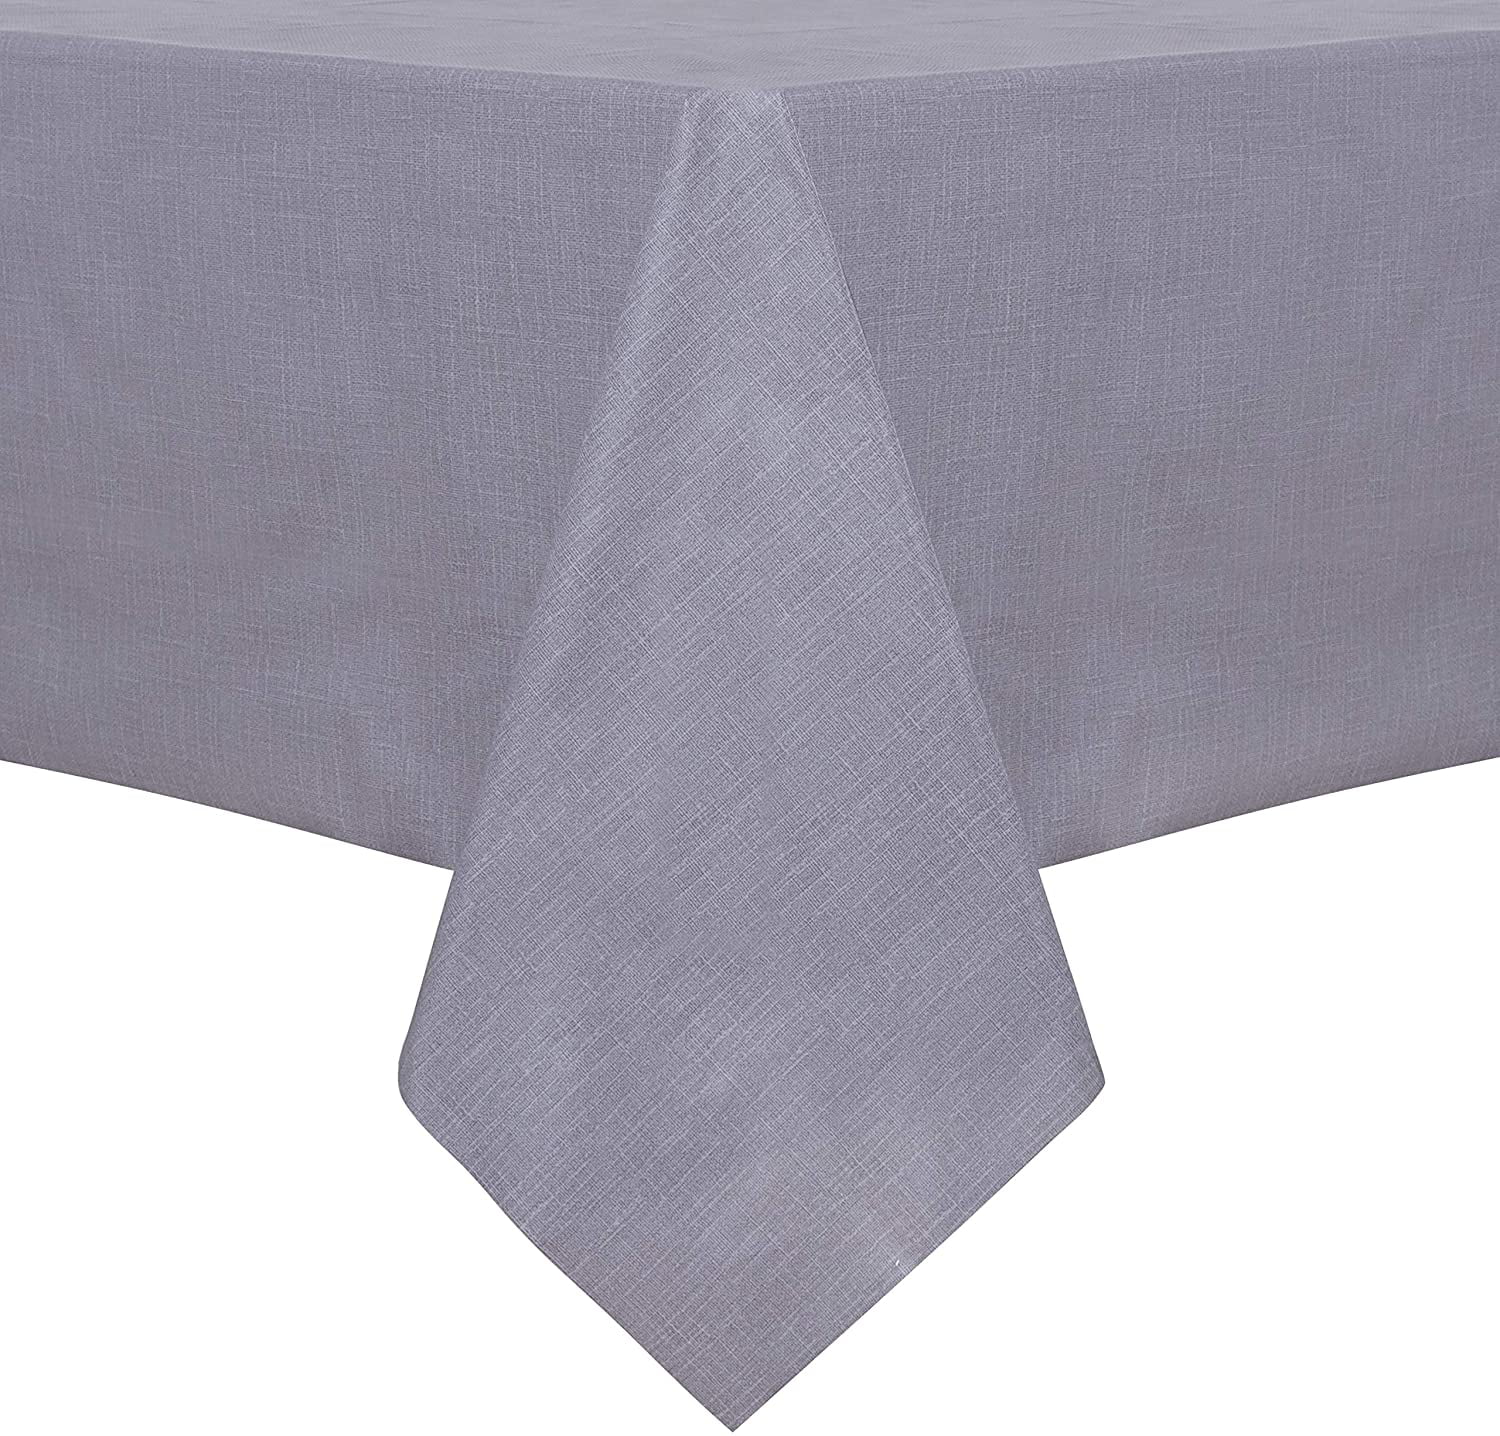 LIGHT GREY GROUND WITH FALLING LEAVES PVC PLASTIC VINYL TABLECLOTH COVER 